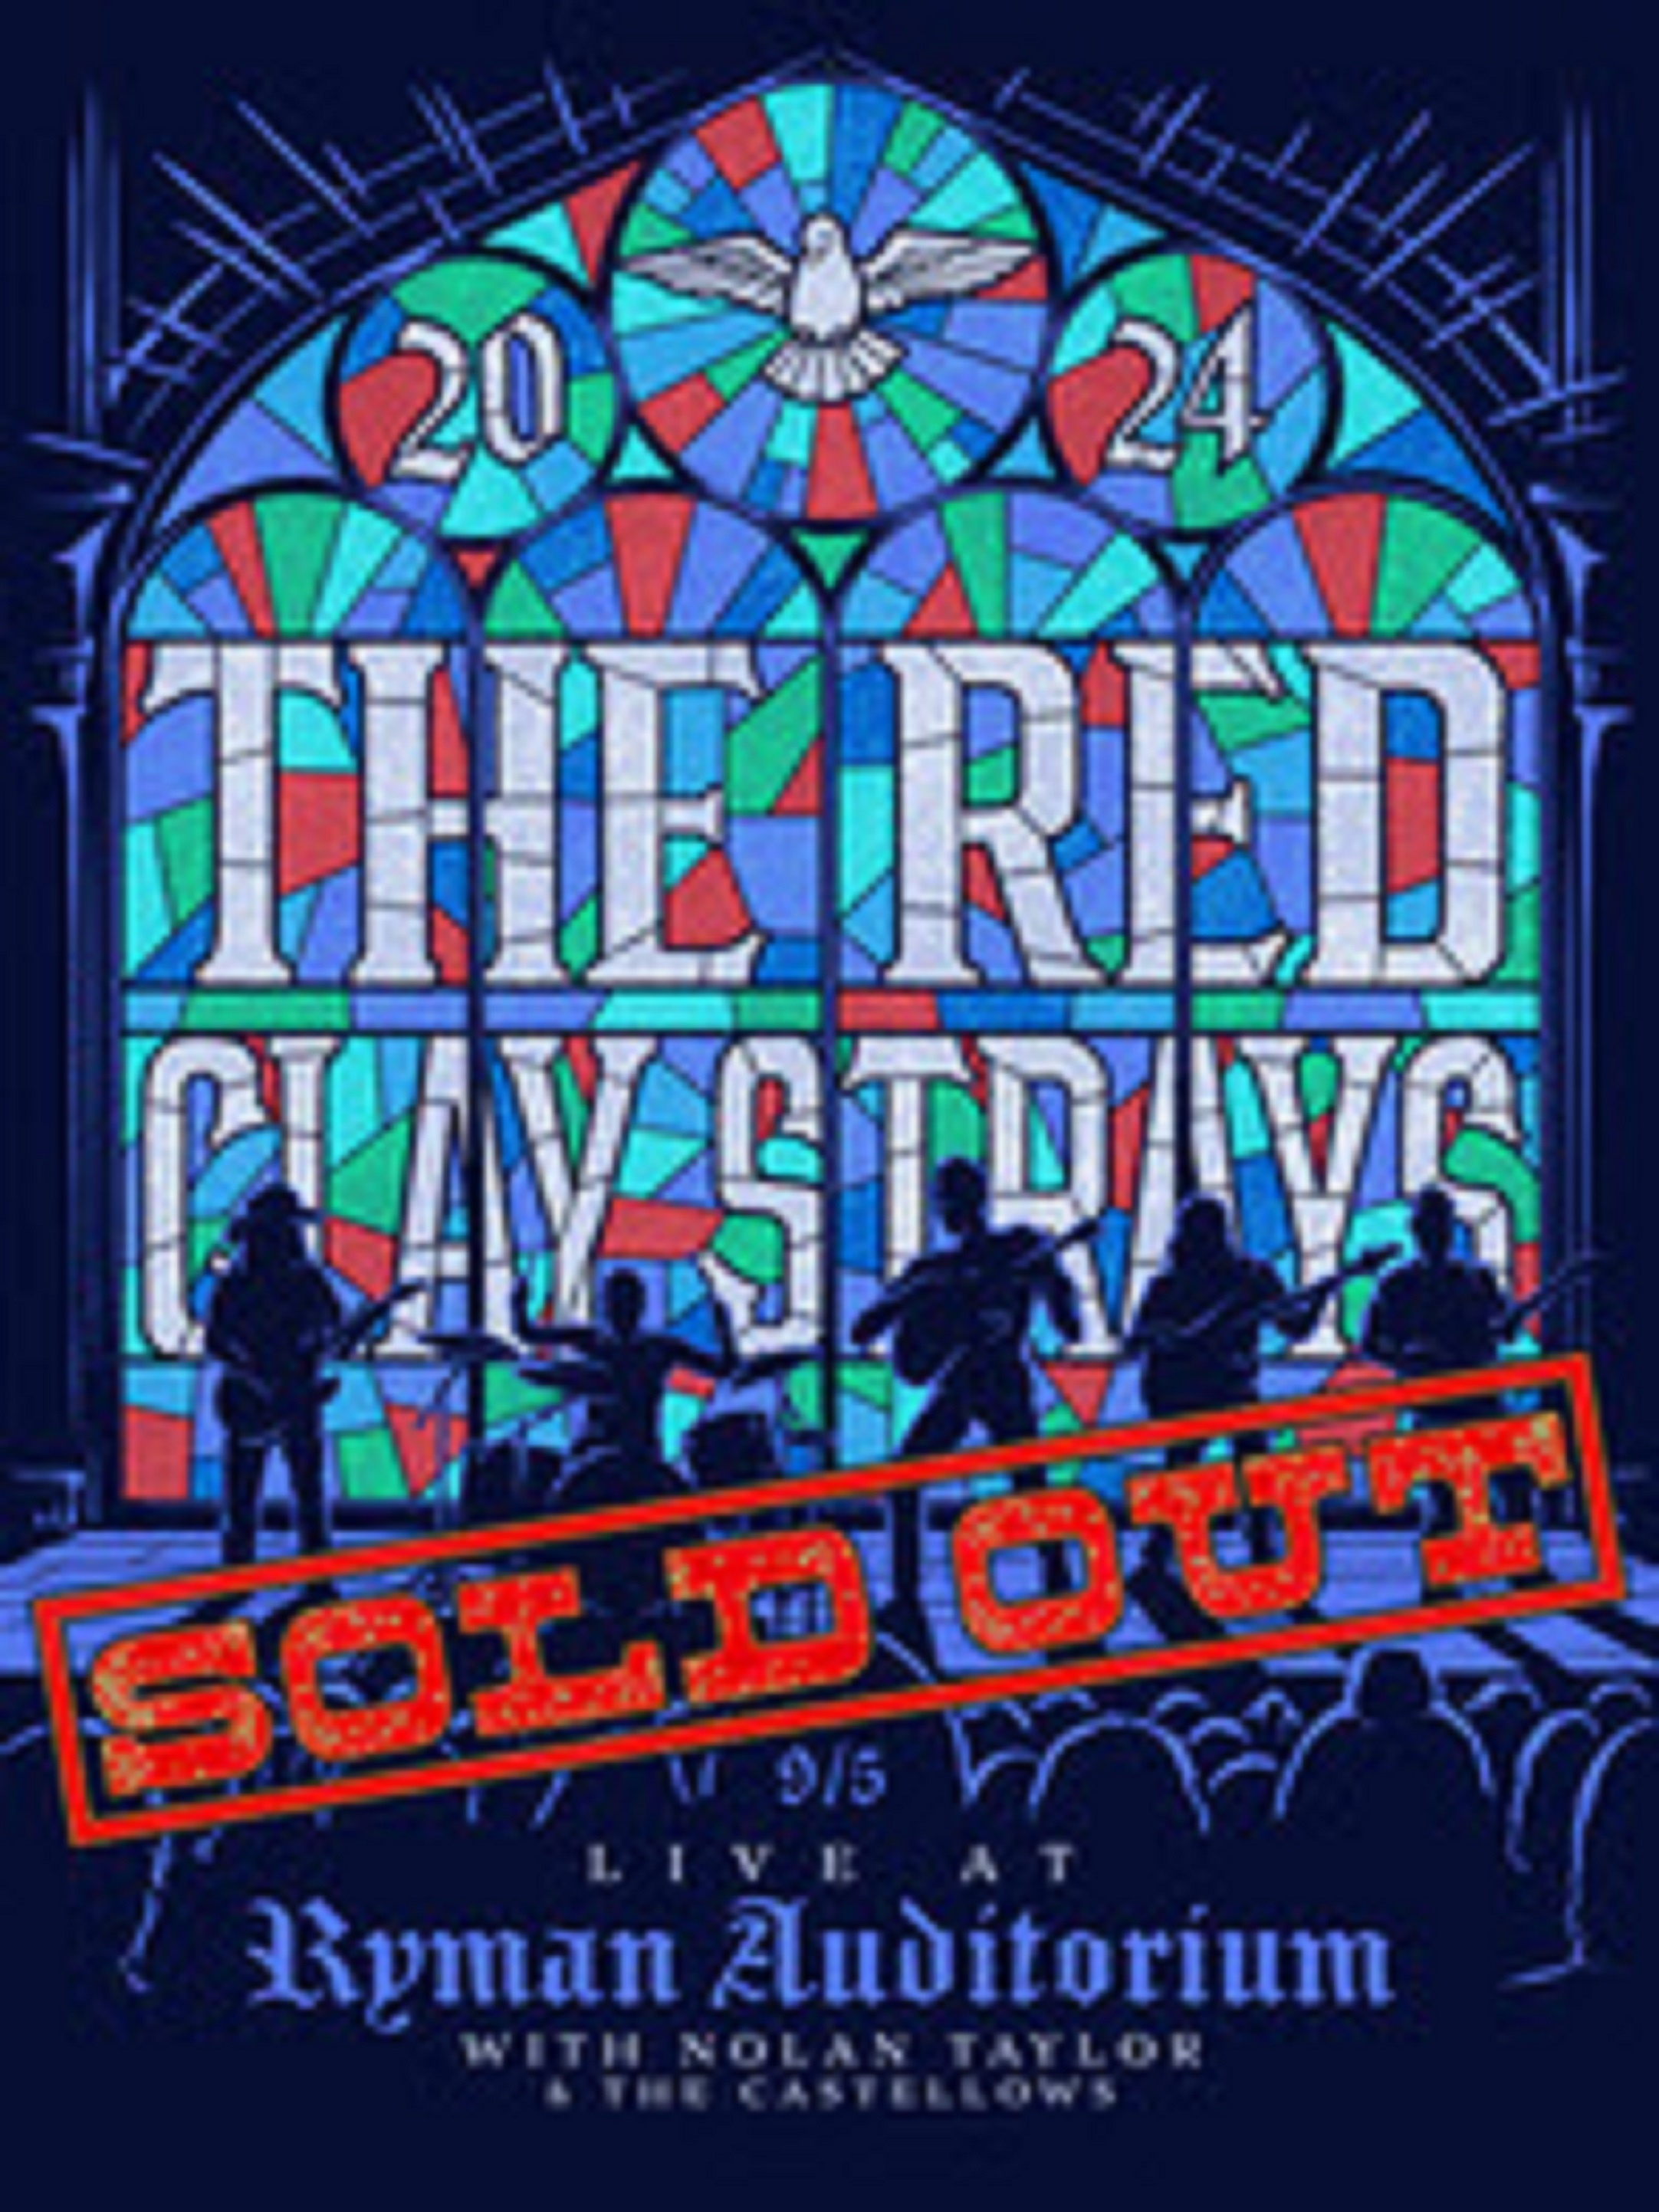 The Red Clay Strays sell-out three night headline debut at Nashville's historic Ryman Auditorium